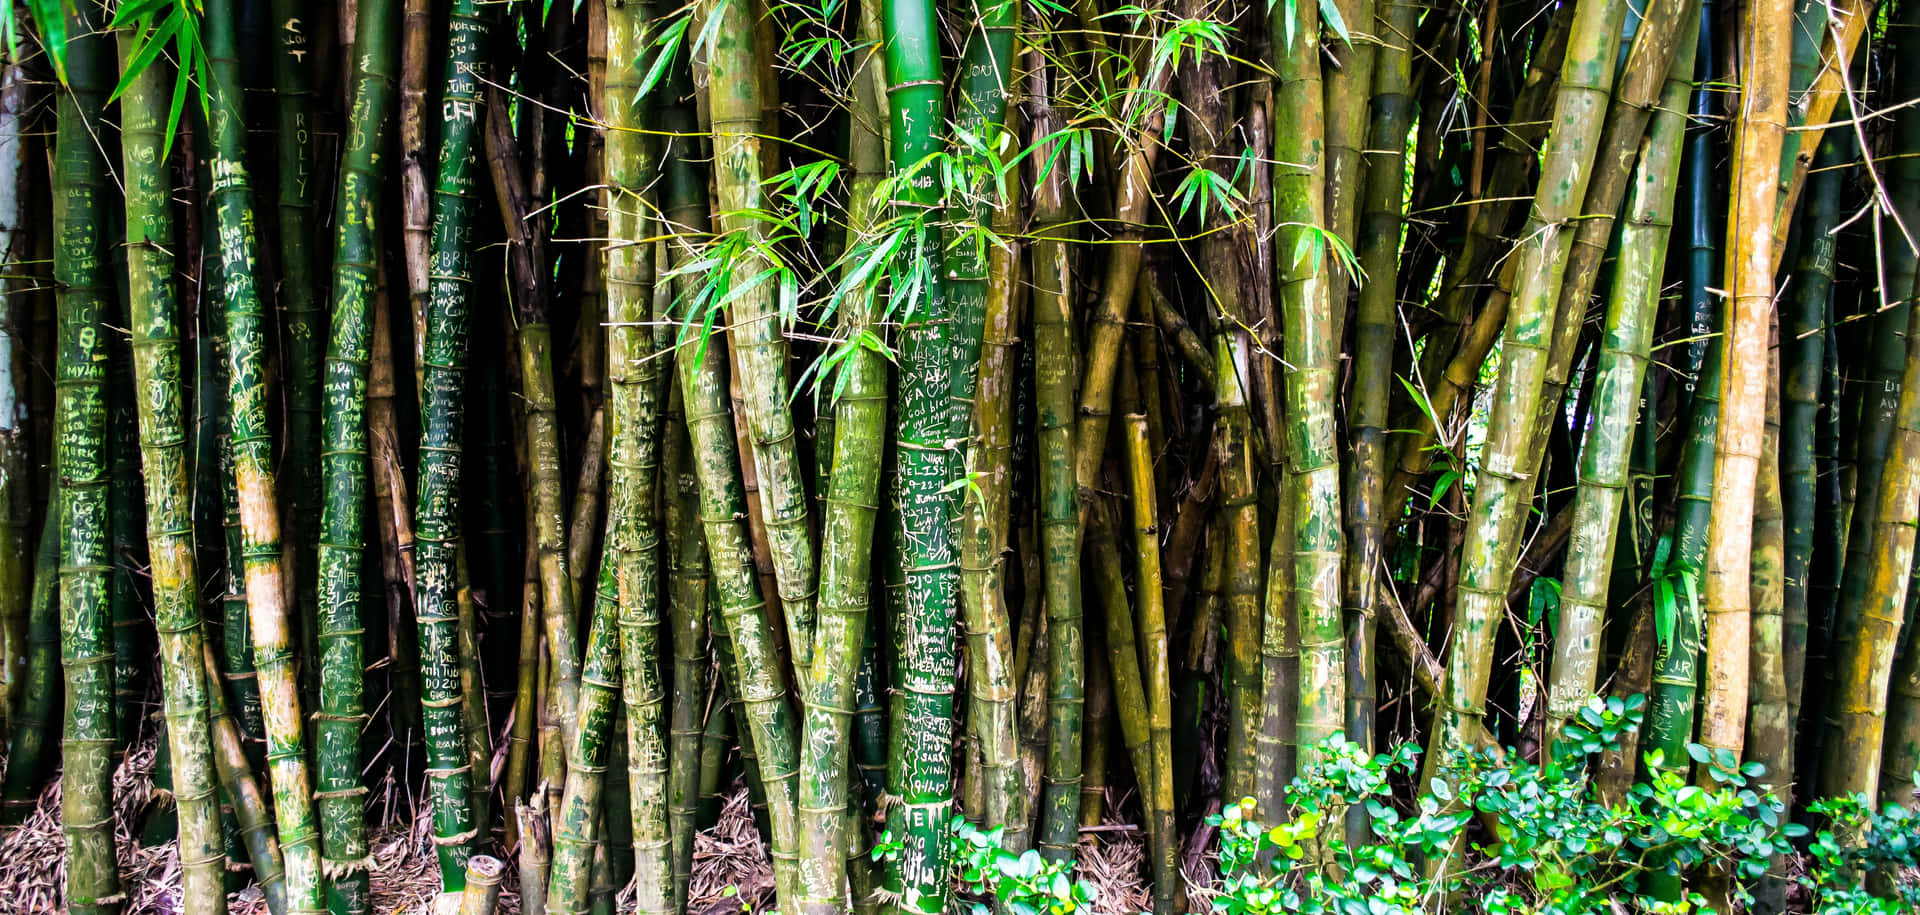 Bamboo Forest With Plants